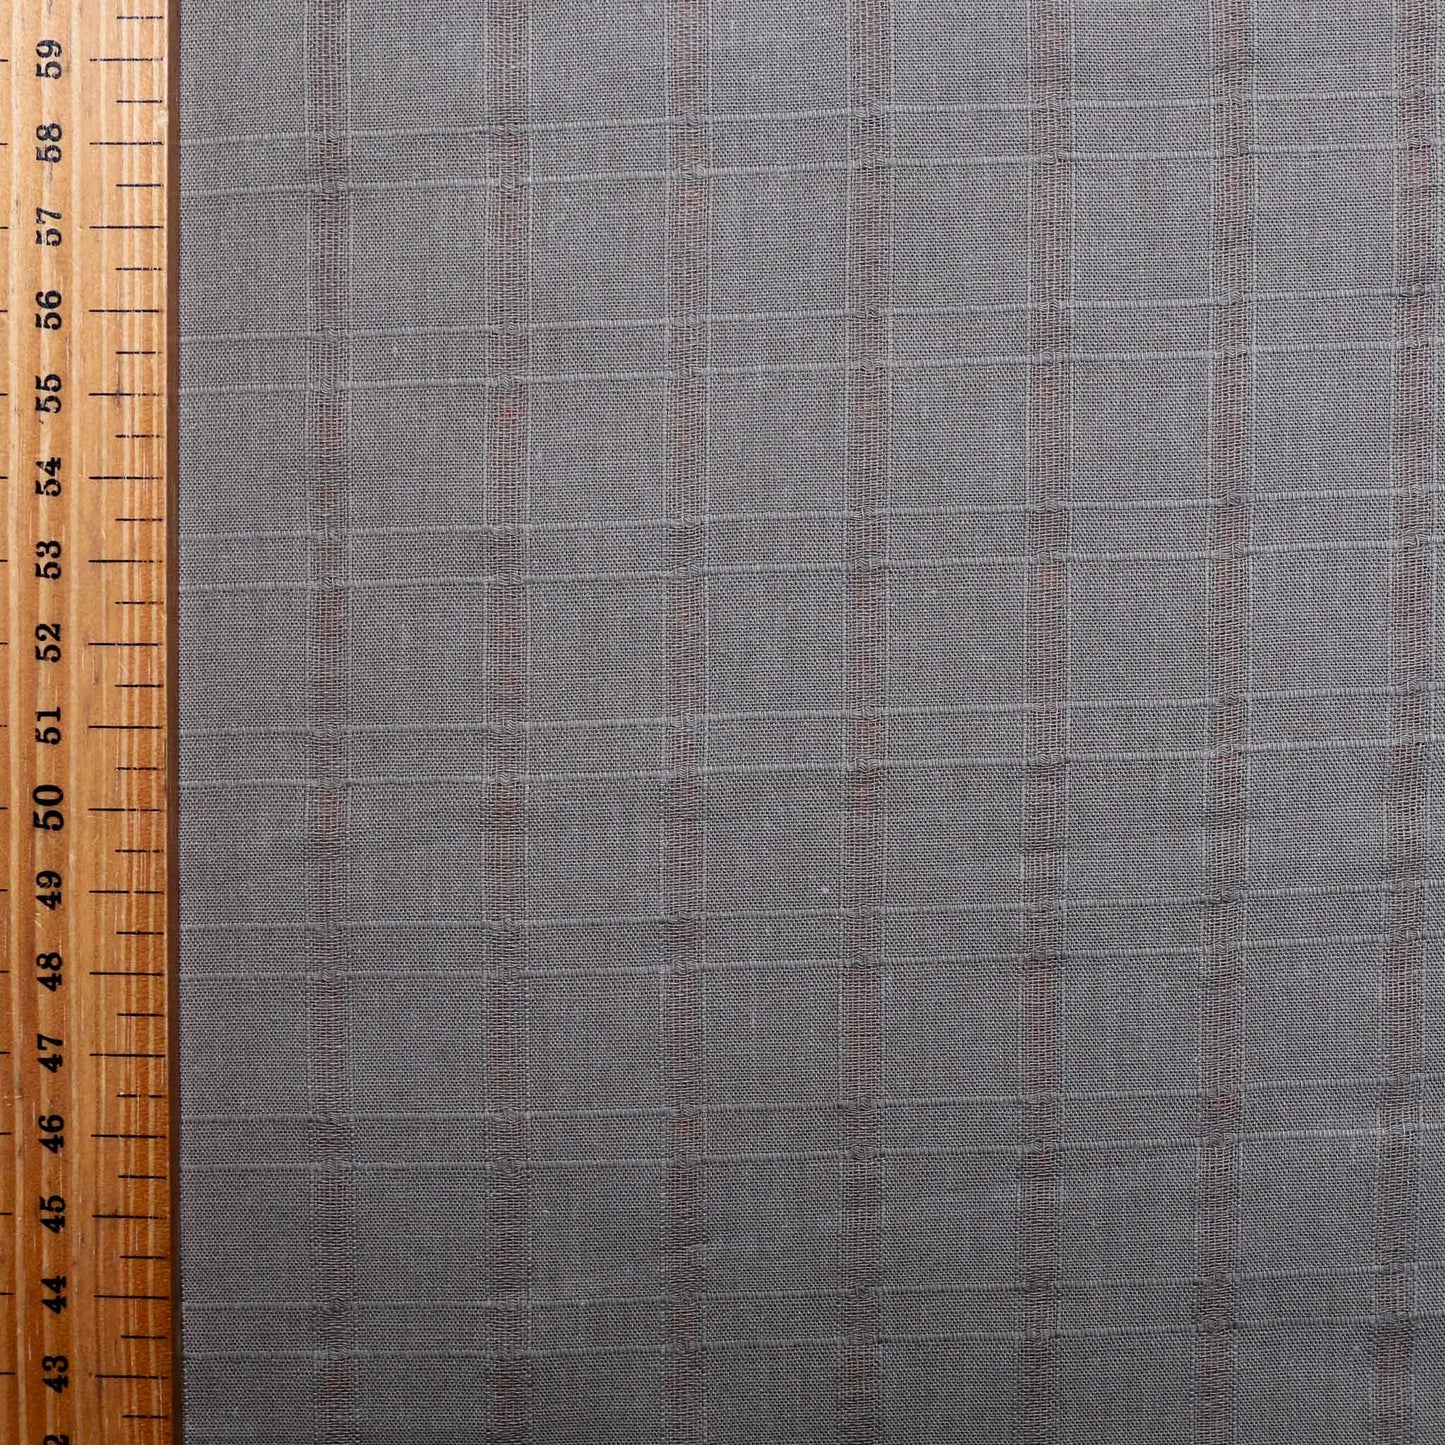 metre of brown cotton dressmaking fabric with jacquard check pattern